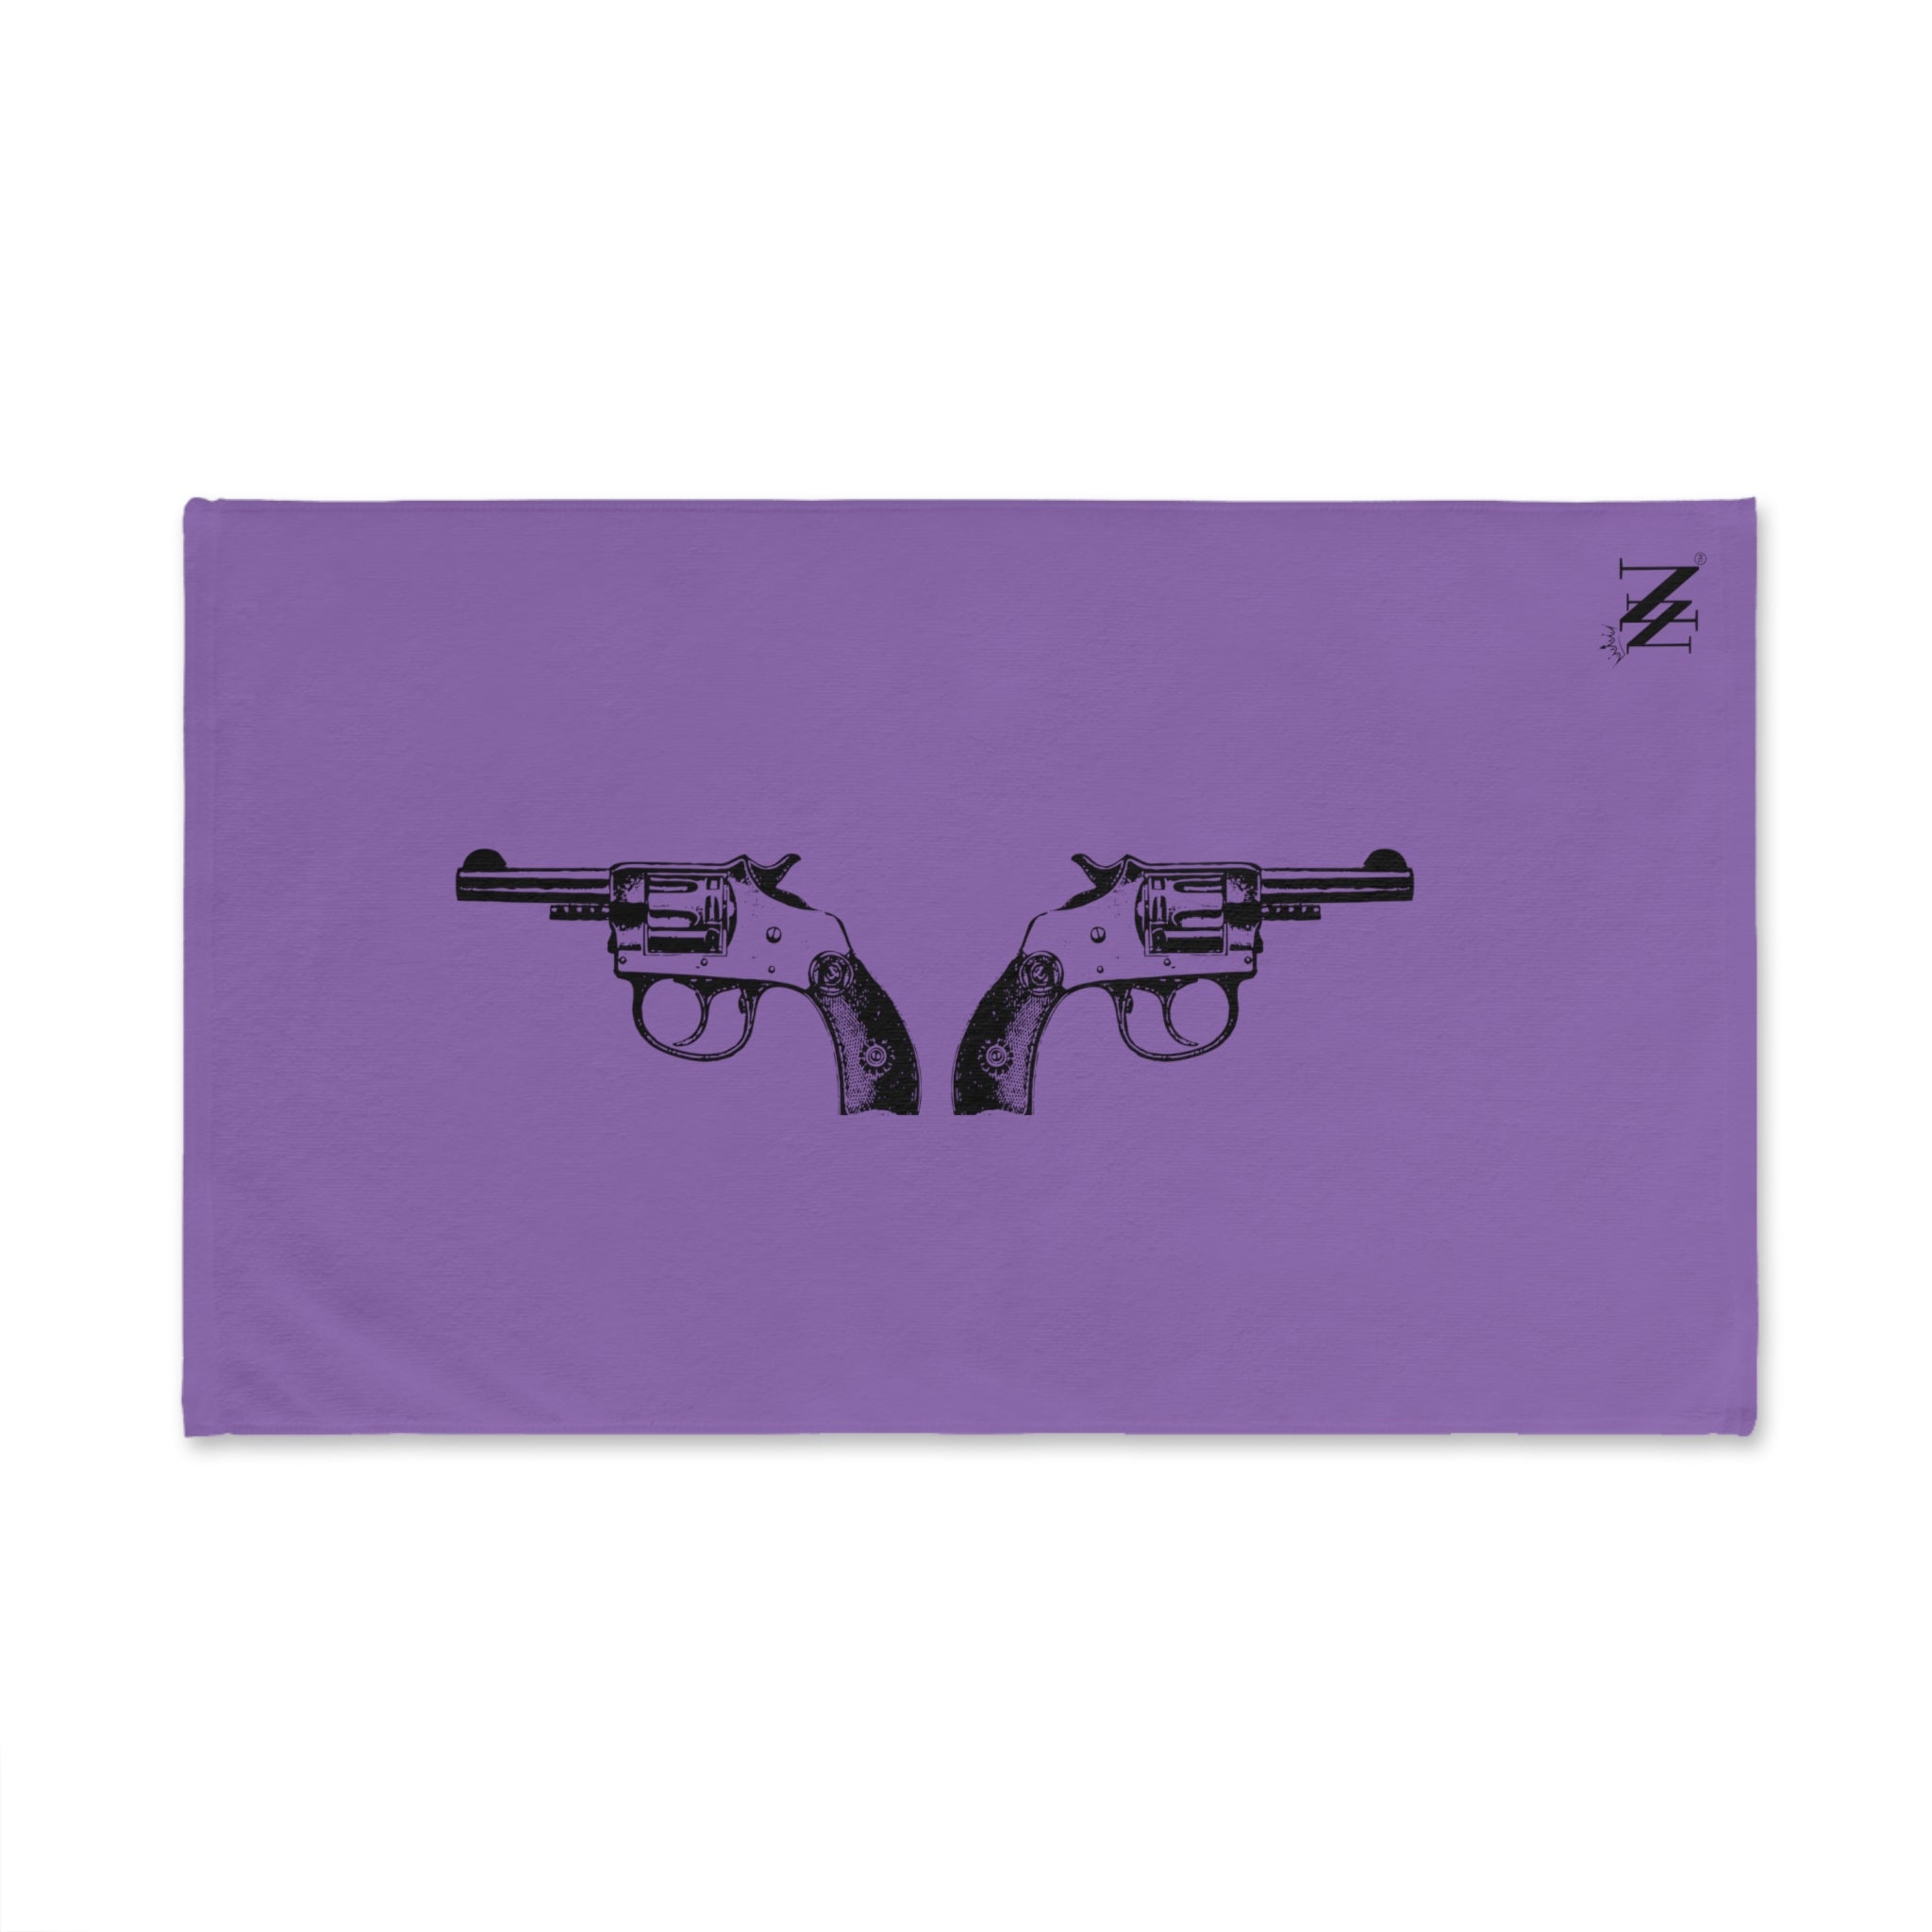 Black Revolver Gun Show Lavendar | Funny Gifts for Men - Gifts for Him - Birthday Gifts for Men, Him, Husband, Boyfriend, New Couple Gifts, Fathers & Valentines Day Gifts, Hand Towels NECTAR NAPKINS